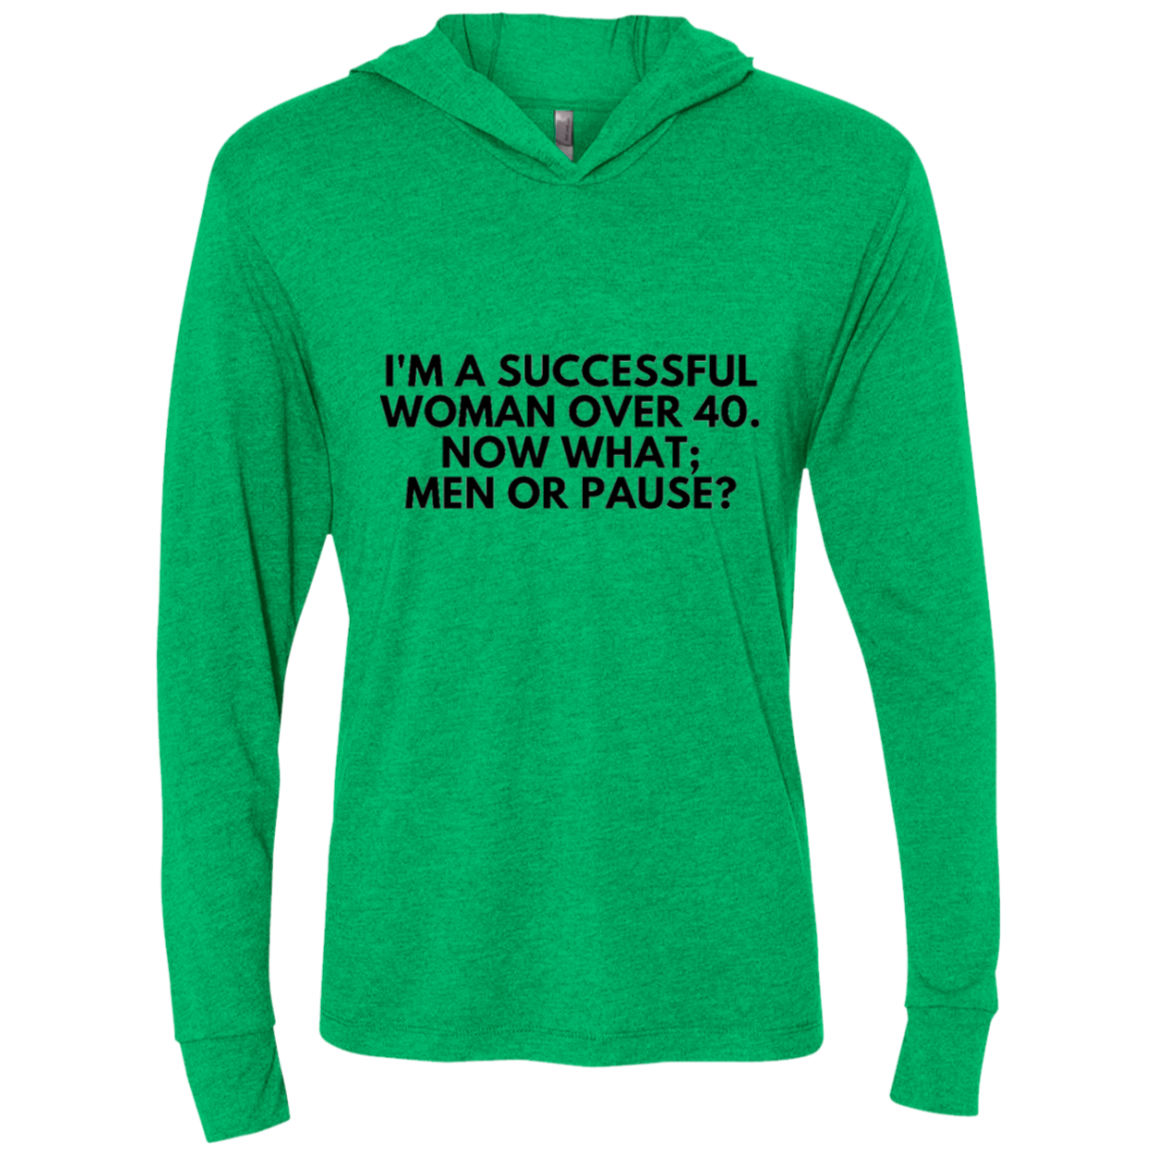 Successful Woman Over 40 - NL6021 Next Level Unisex Triblend LS Hooded T-Shirt